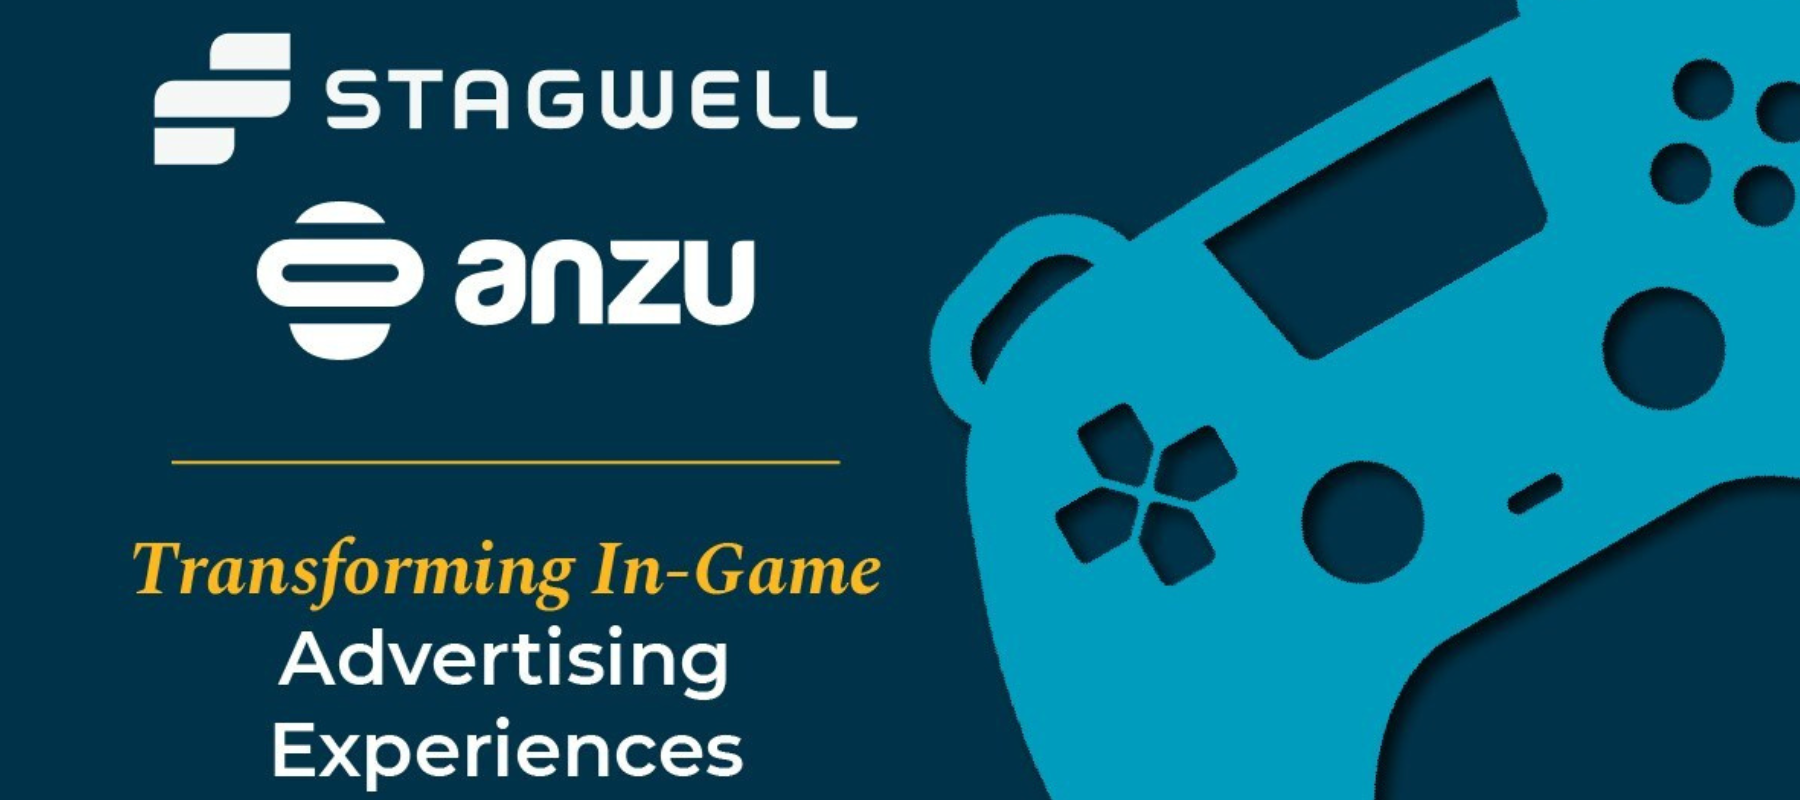 Stagwell partners with Anzu to transform the in-game advertising experience